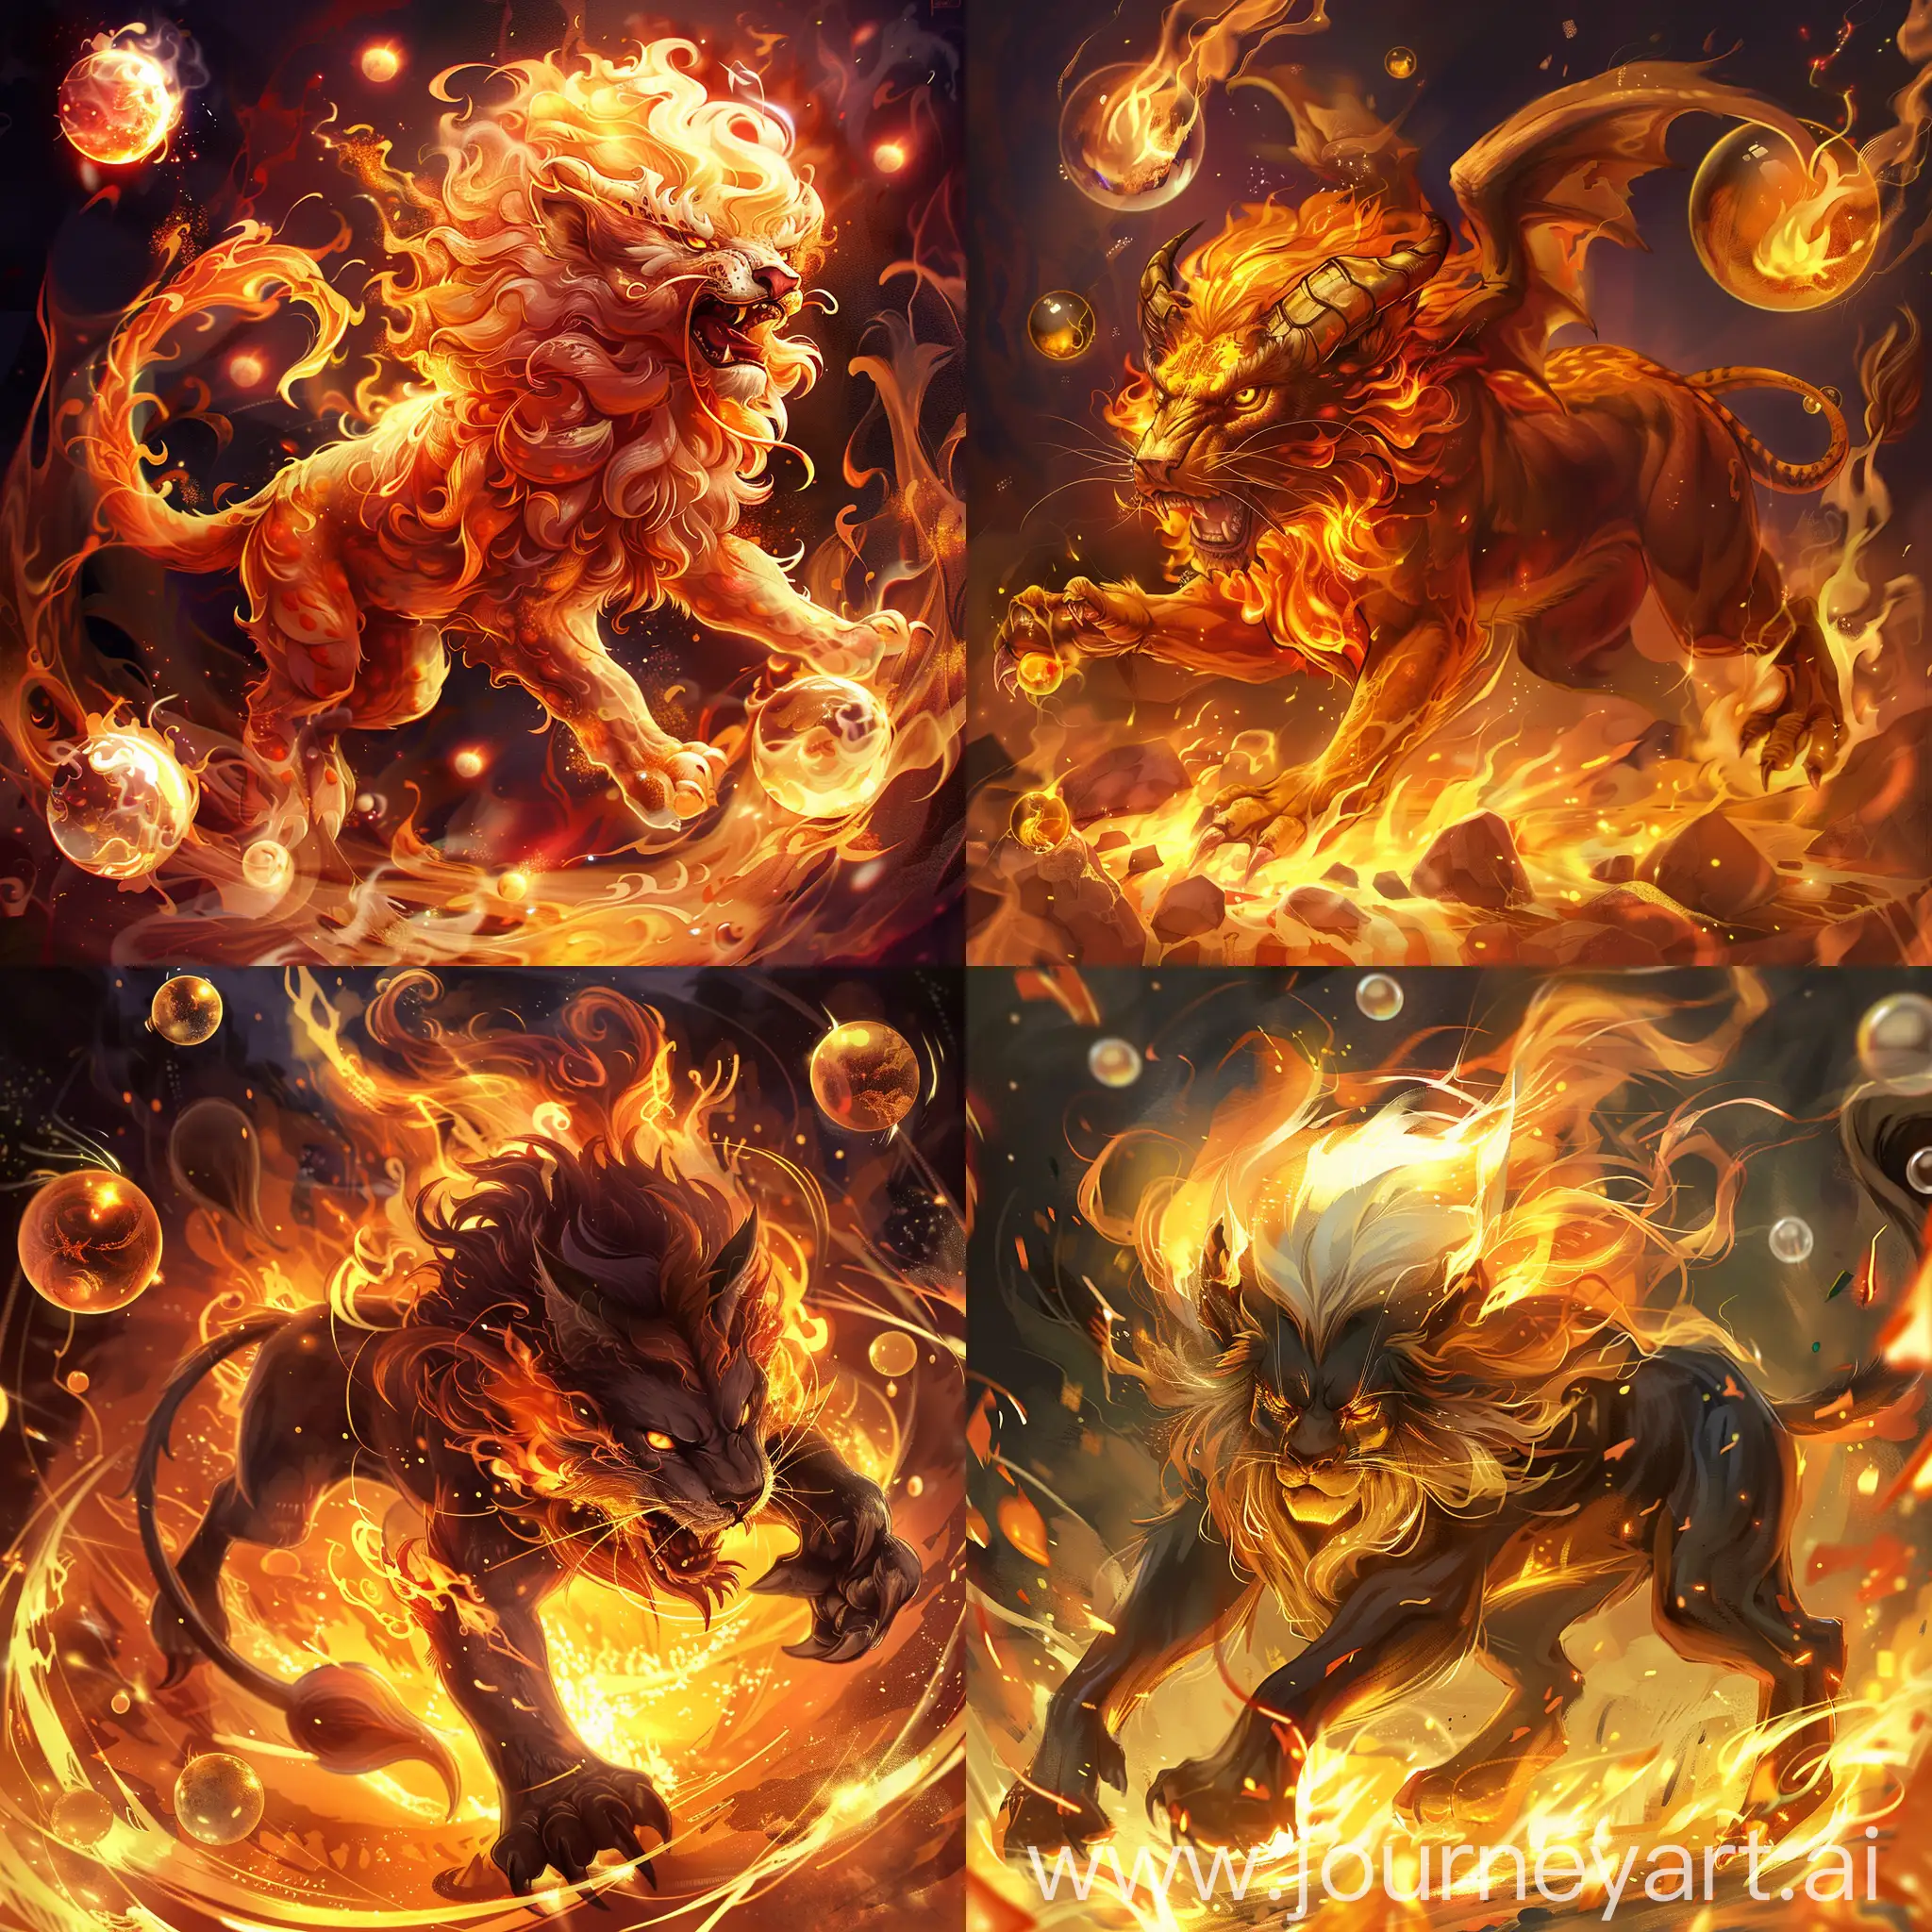 Create an image of a Chimera in a realistic cartoon style. I want it in the middle of fire with mirror spheres around
